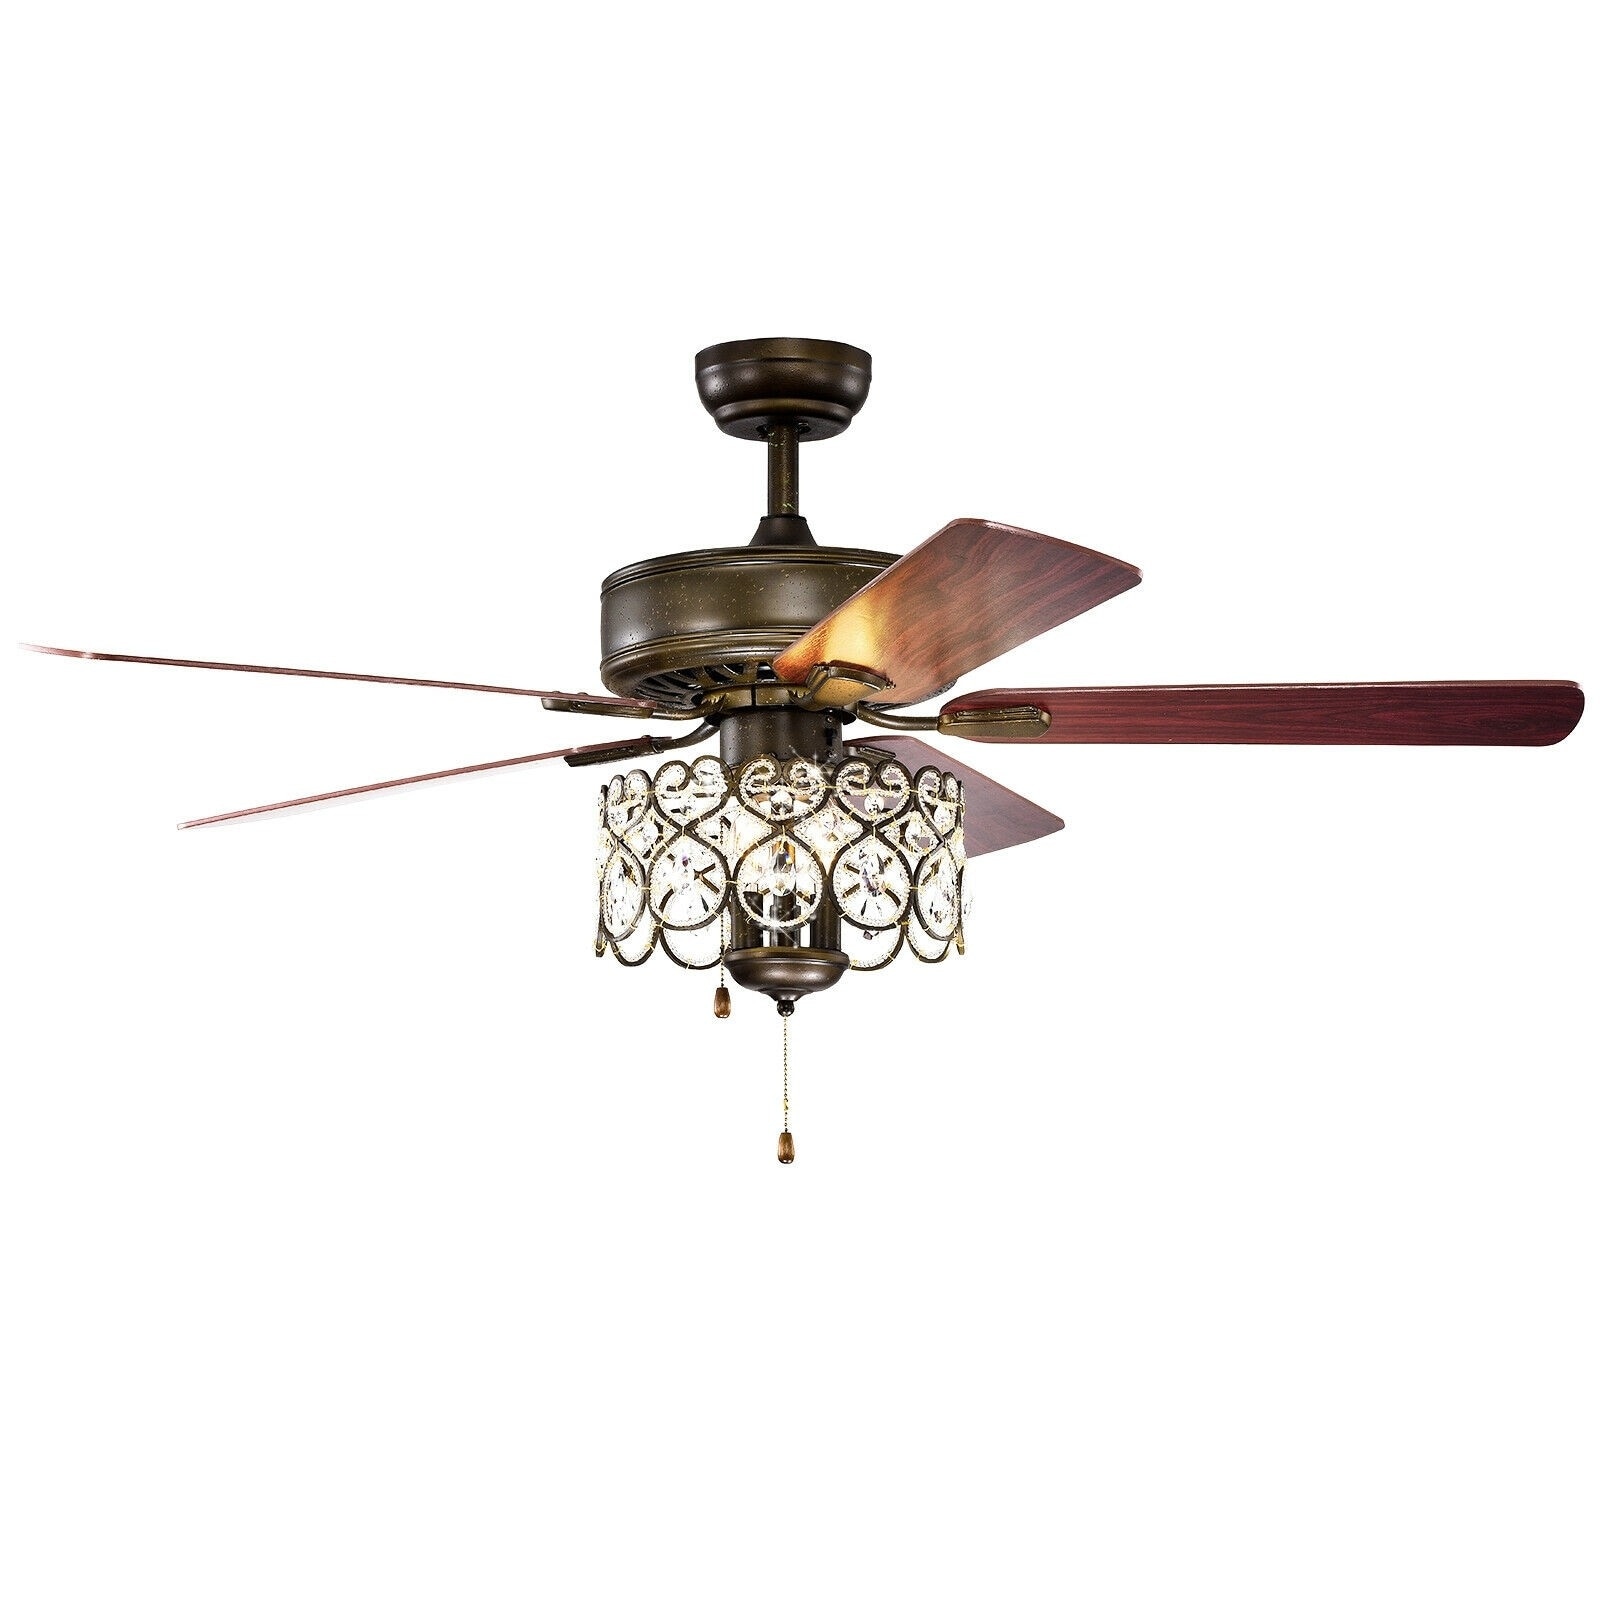 Details about   52" Retro Pull Chain Crystal Chandelier Reversible Wood Blades Ceiling Fan Light 